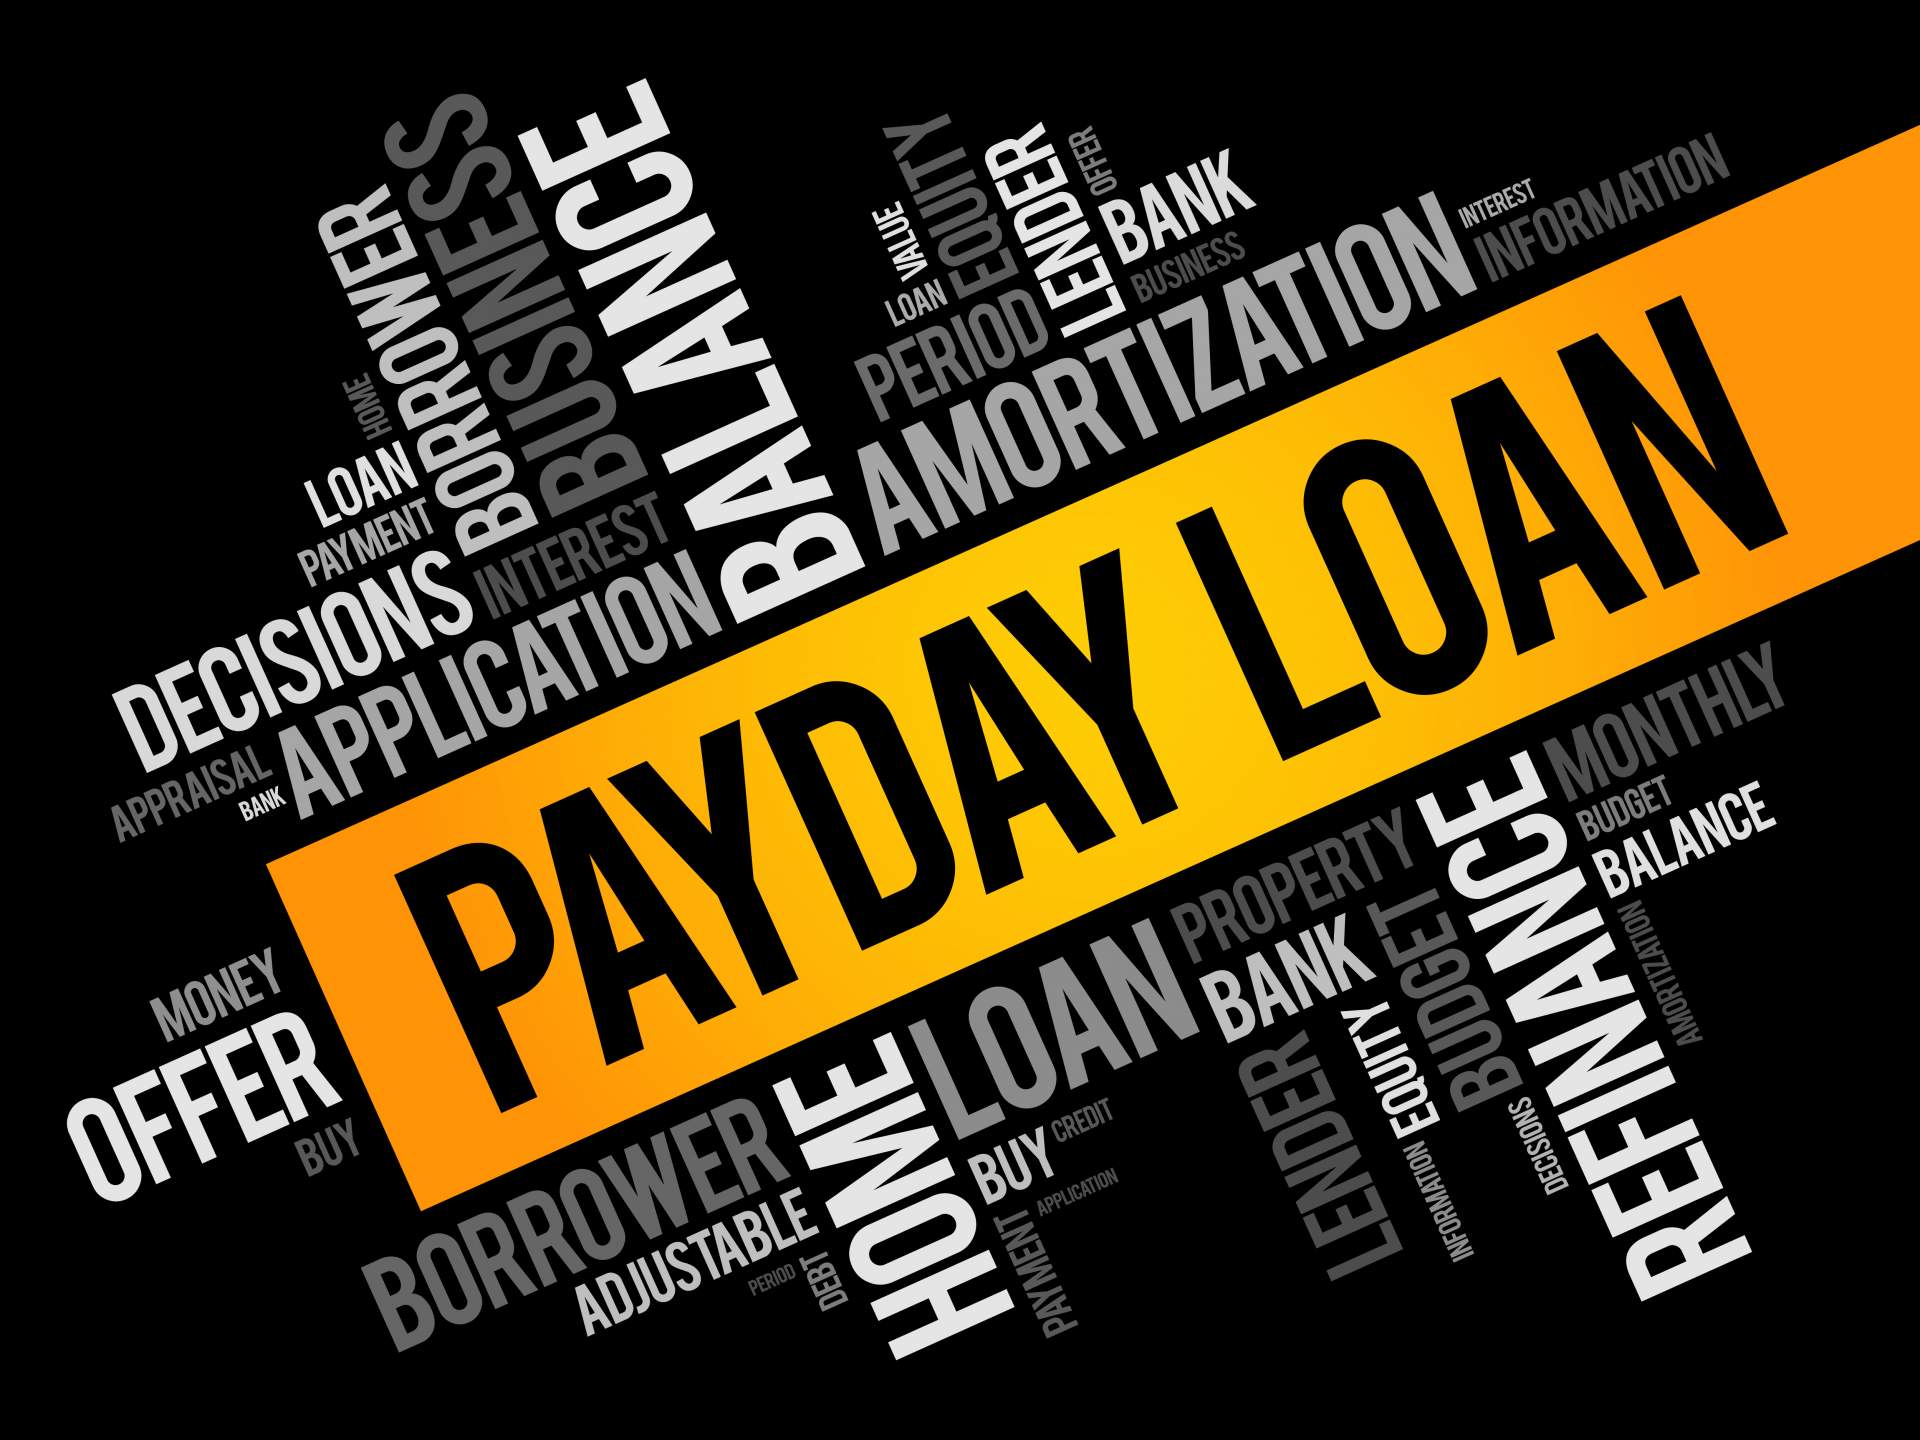 Pay Loans- What Are The Various Types With Their Features